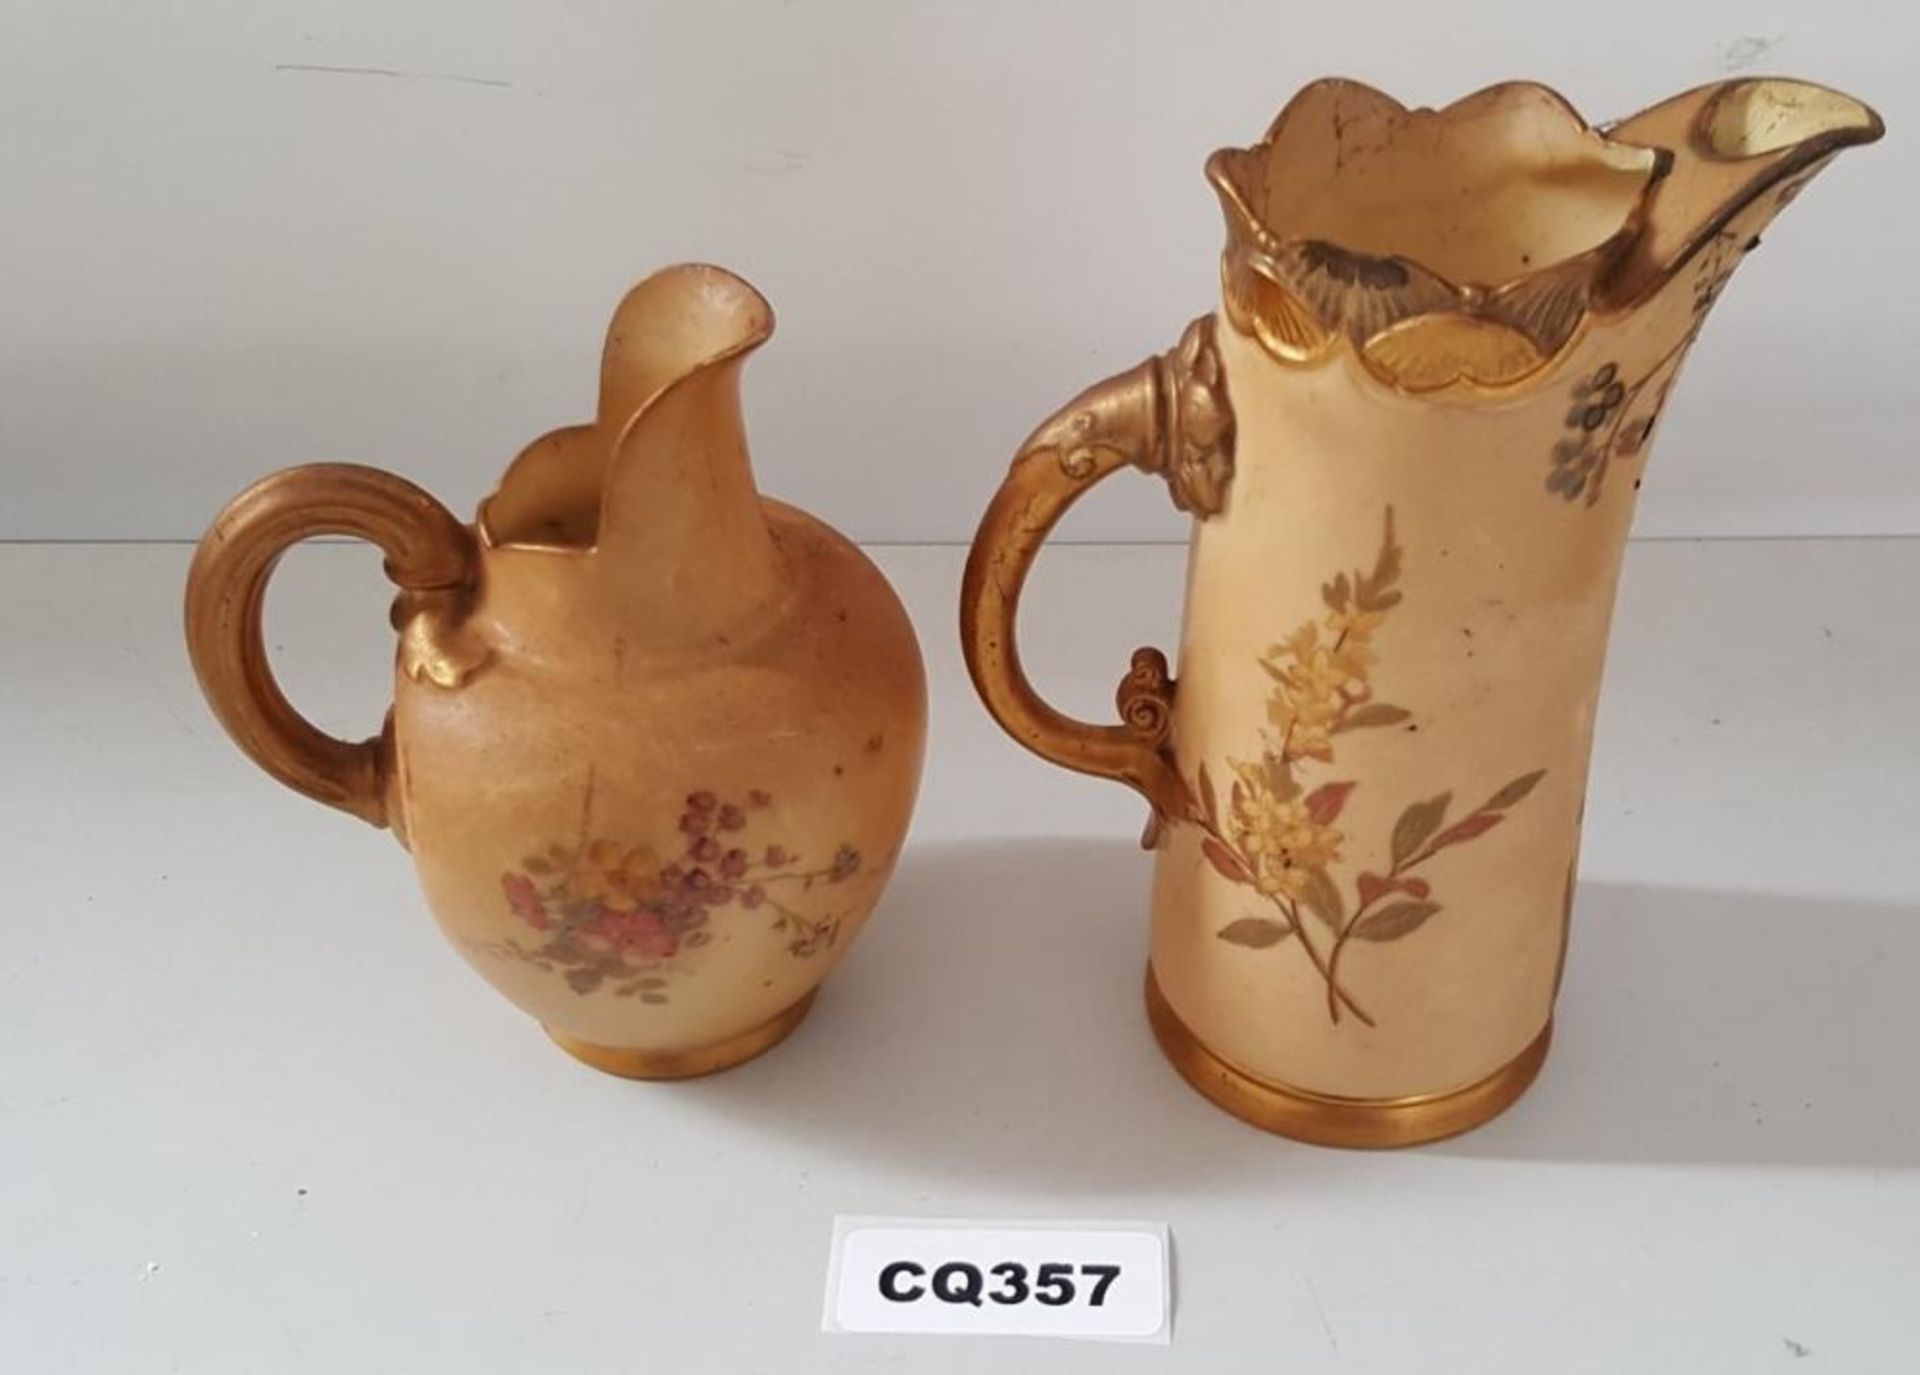 1 x A Pair Of Royal Worcester Blush Ivory Jugs(1094&1229) - Ref CQ357 E - Dimensions: 1094(H12/L10cm - Image 3 of 4